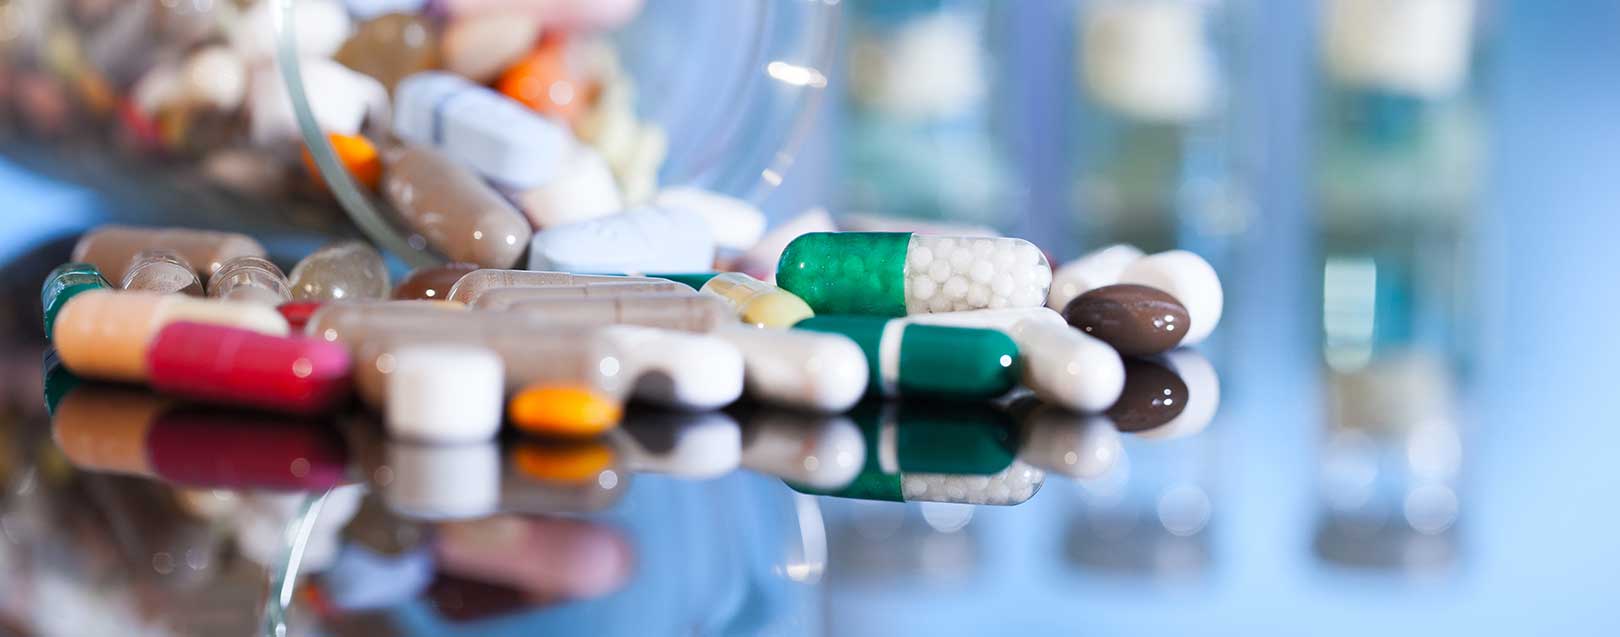 India’s pharma exports increase by 9.7% in 2015-16